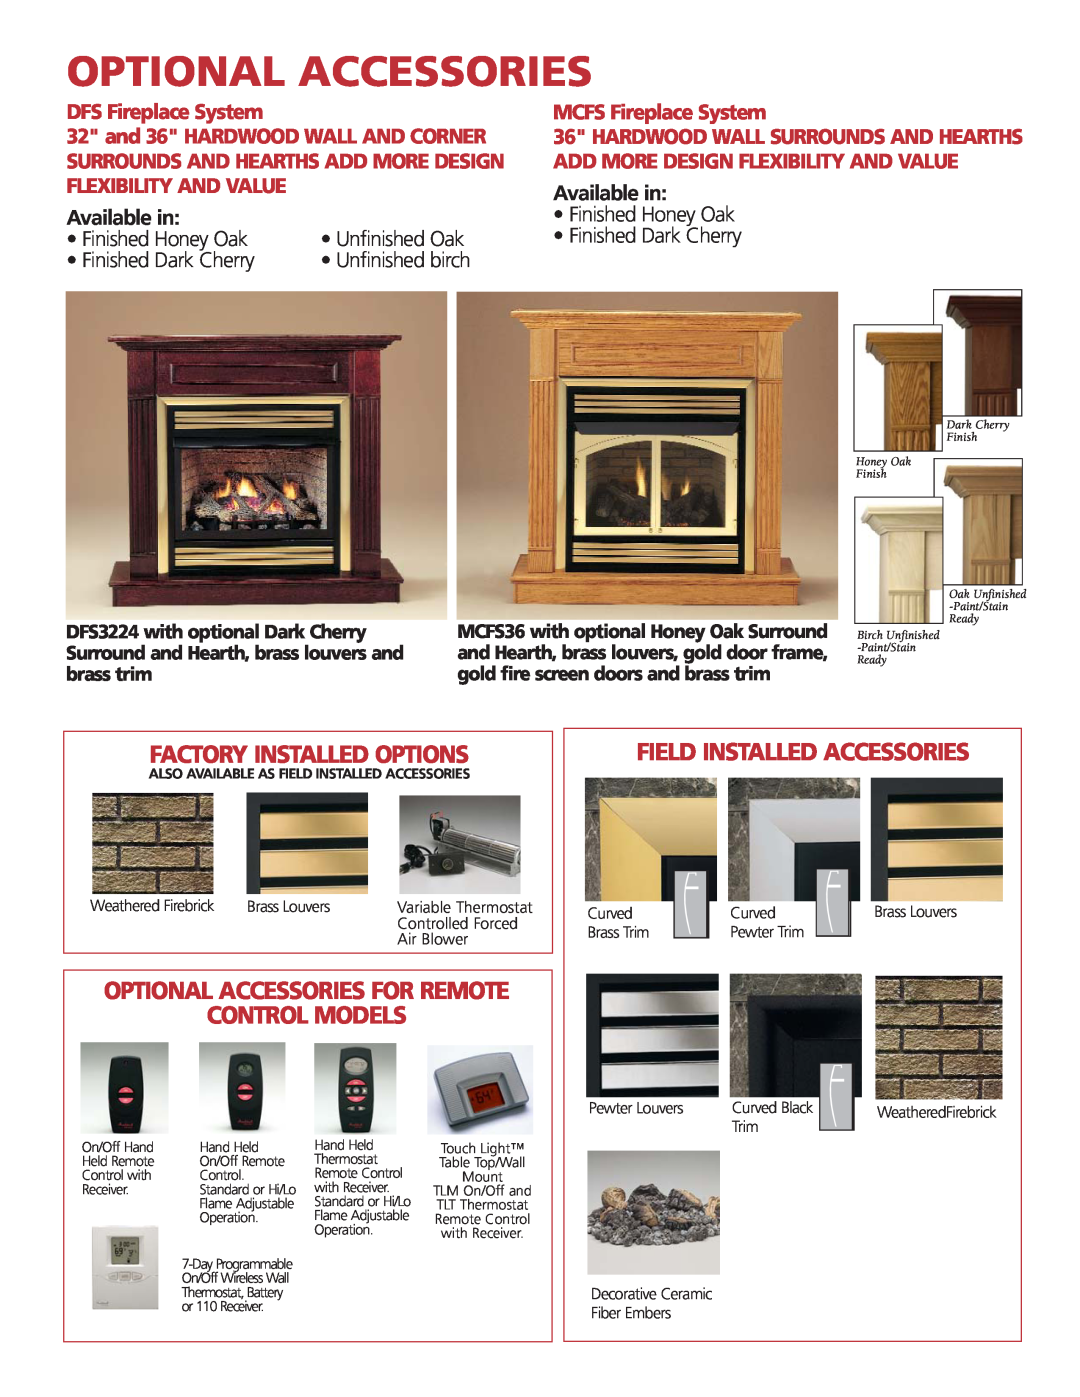 Monessen Hearth DFS36, MCFS36 Optional Accessories, Available in, Finished Honey Oak, Finished Dark Cherry, Control Models 